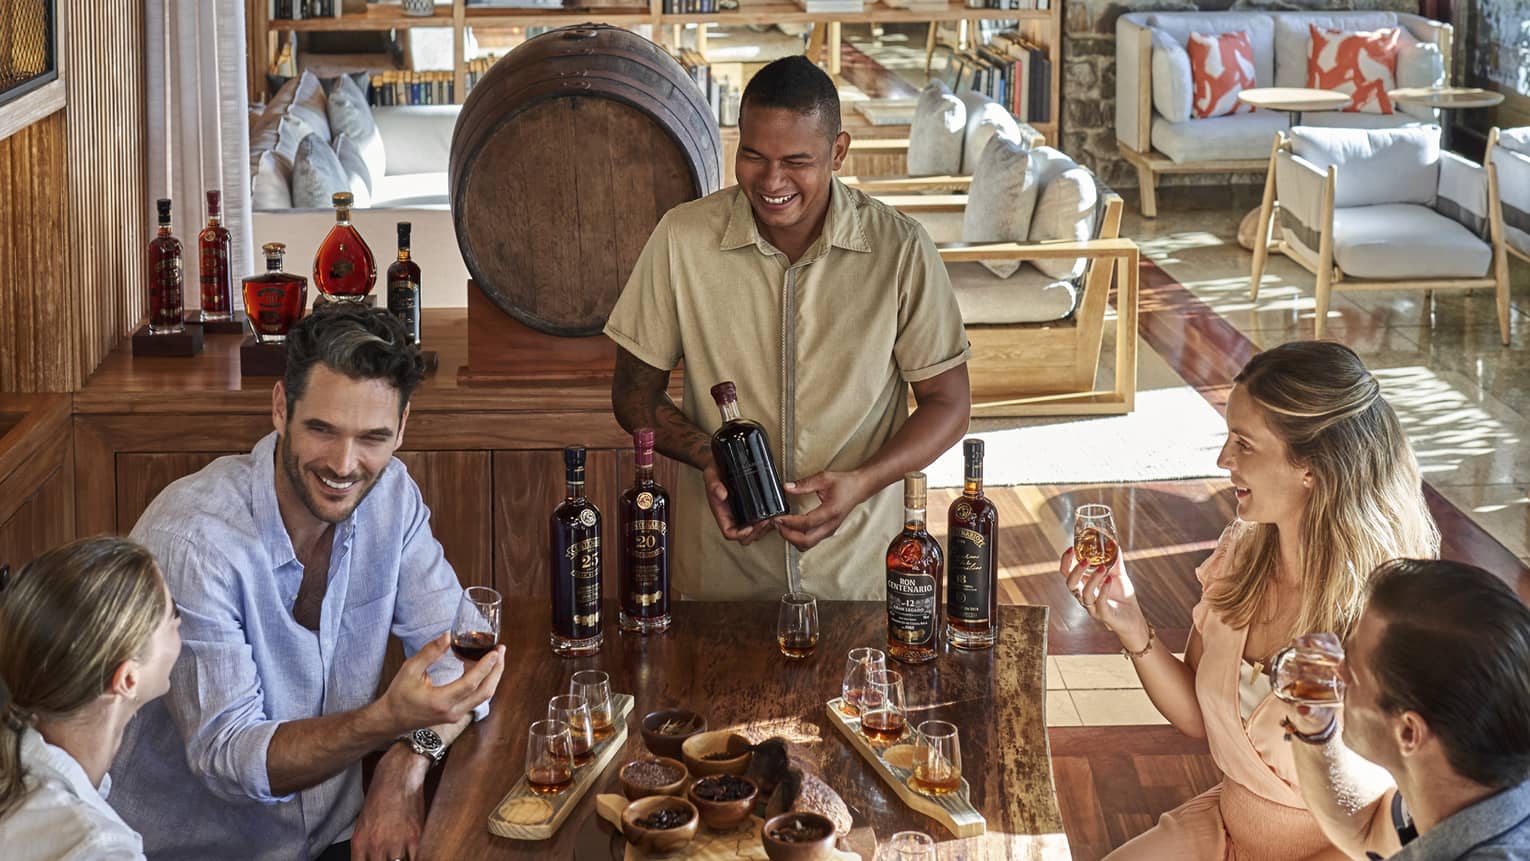 A bartender smiles as four guests sample different kinds of rum at a table set with bowls of chocolate, glasses and bottles.